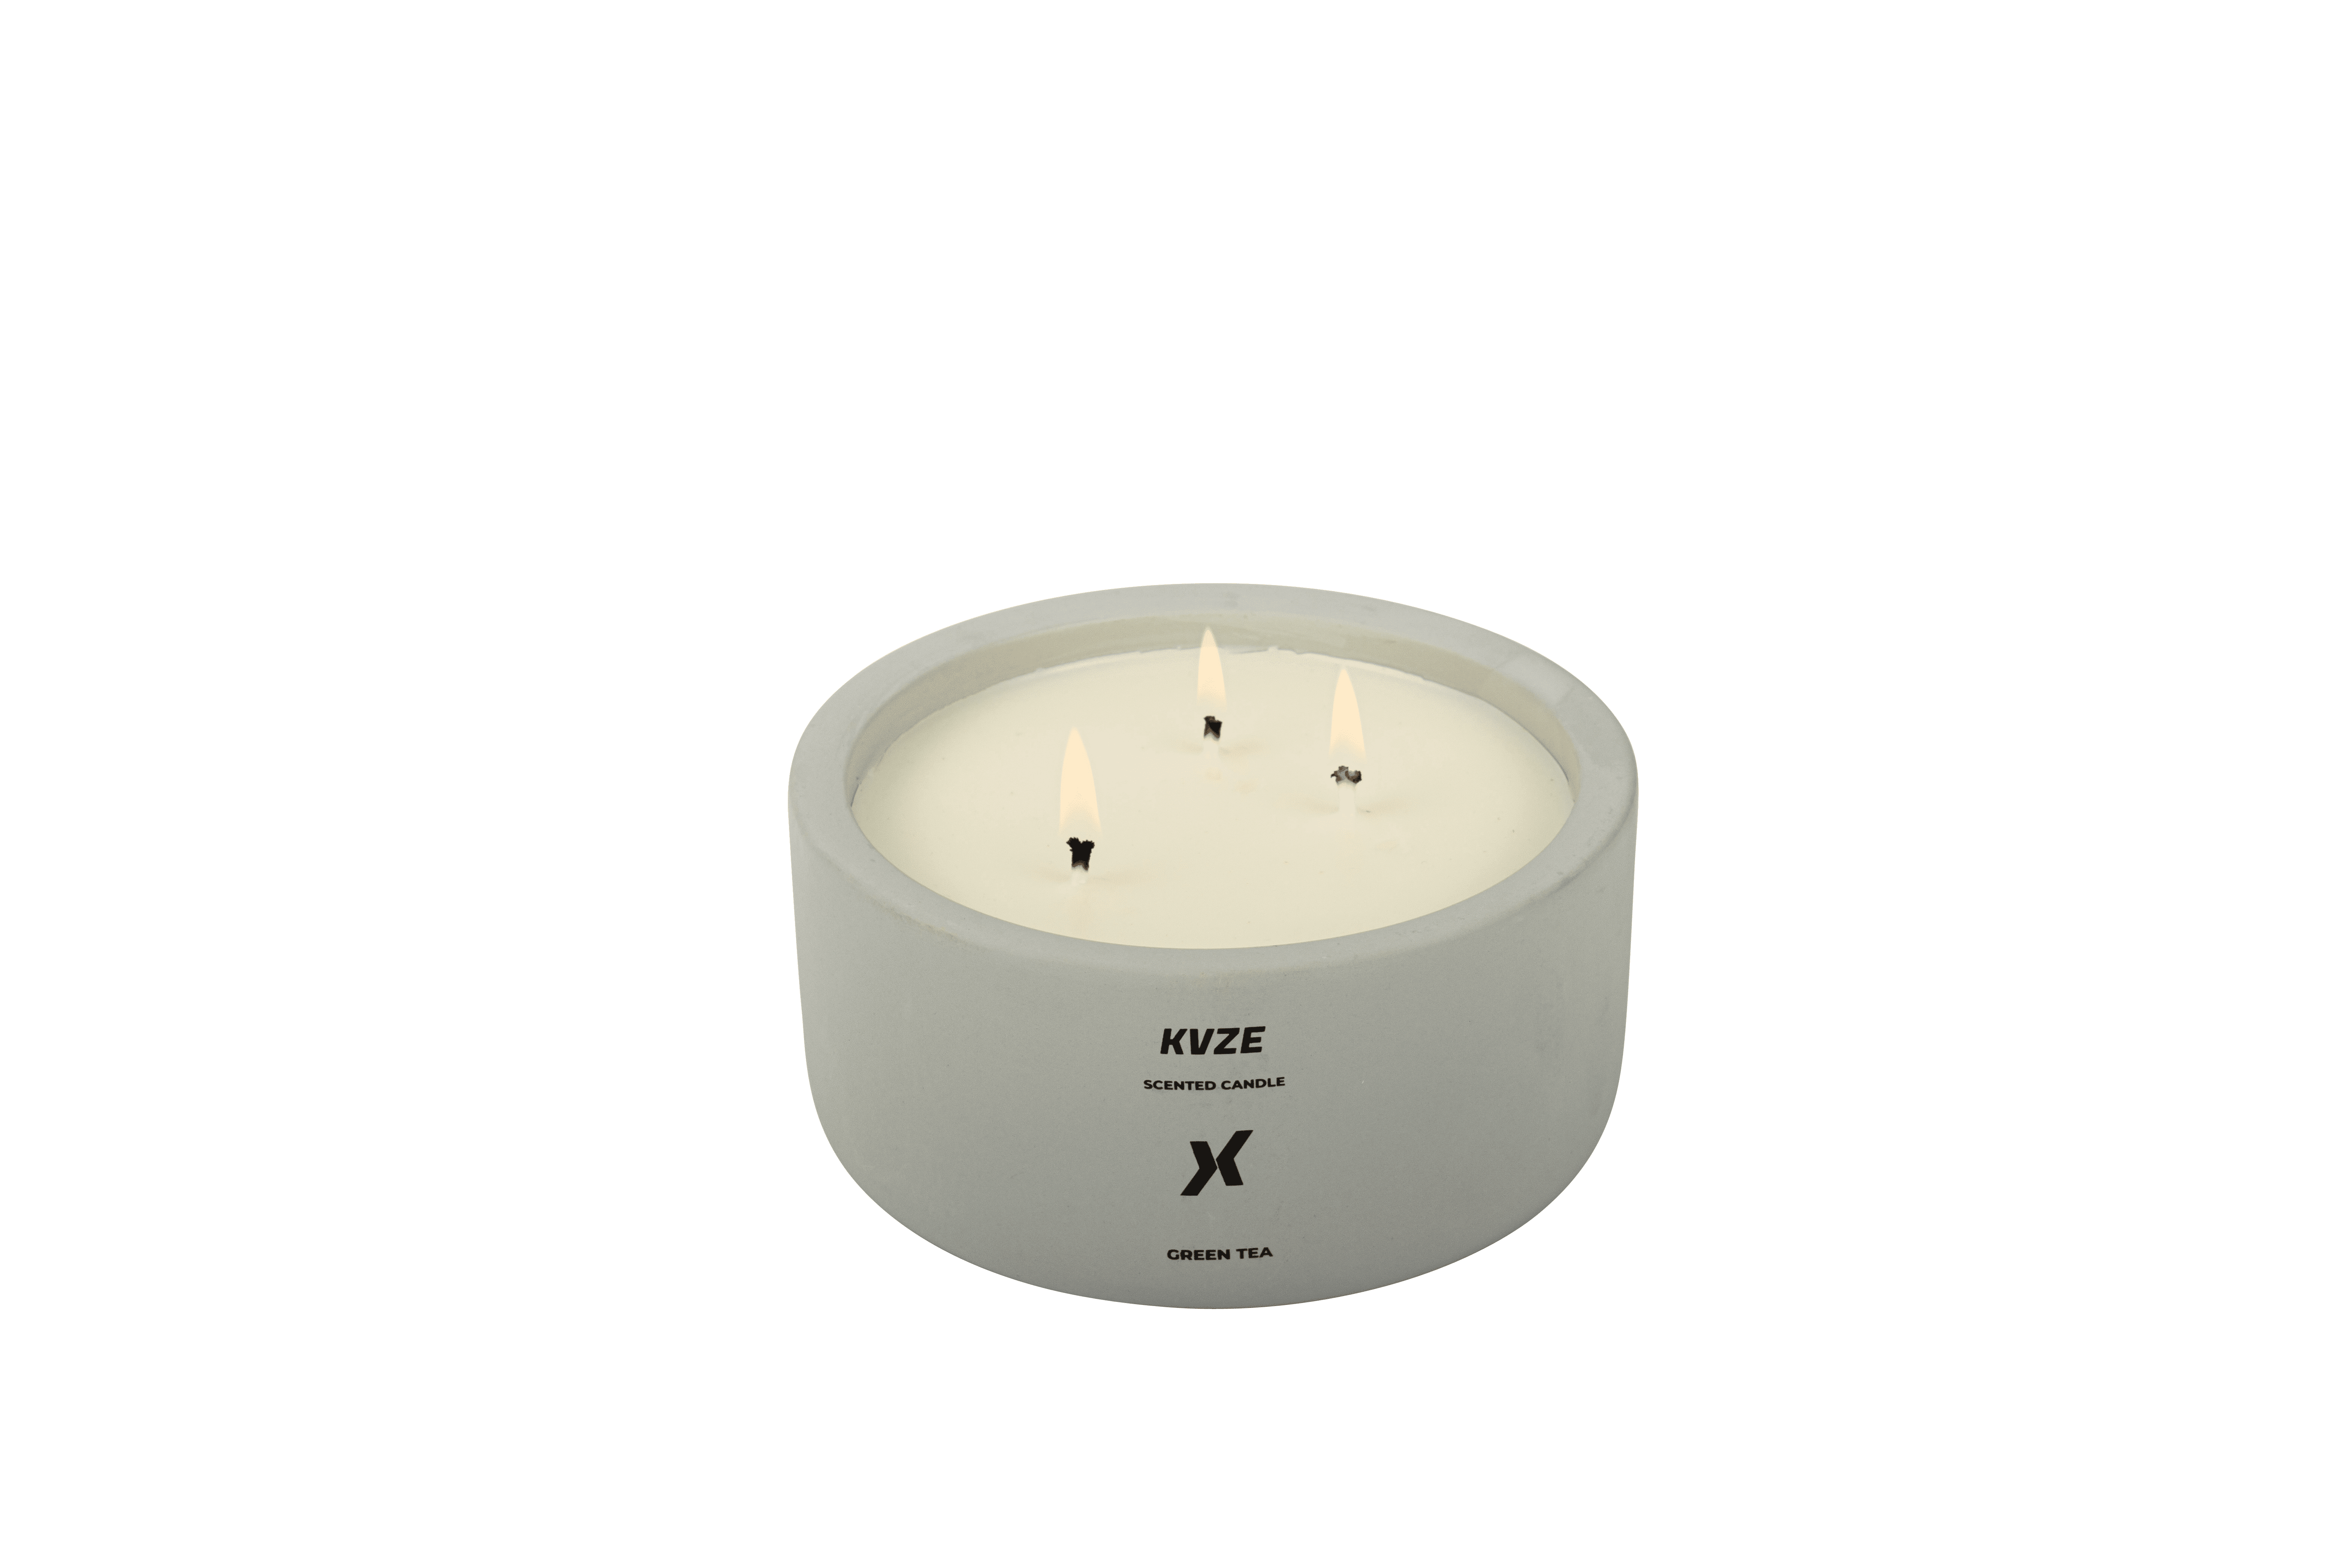 KVZE SCENTED CANDLE